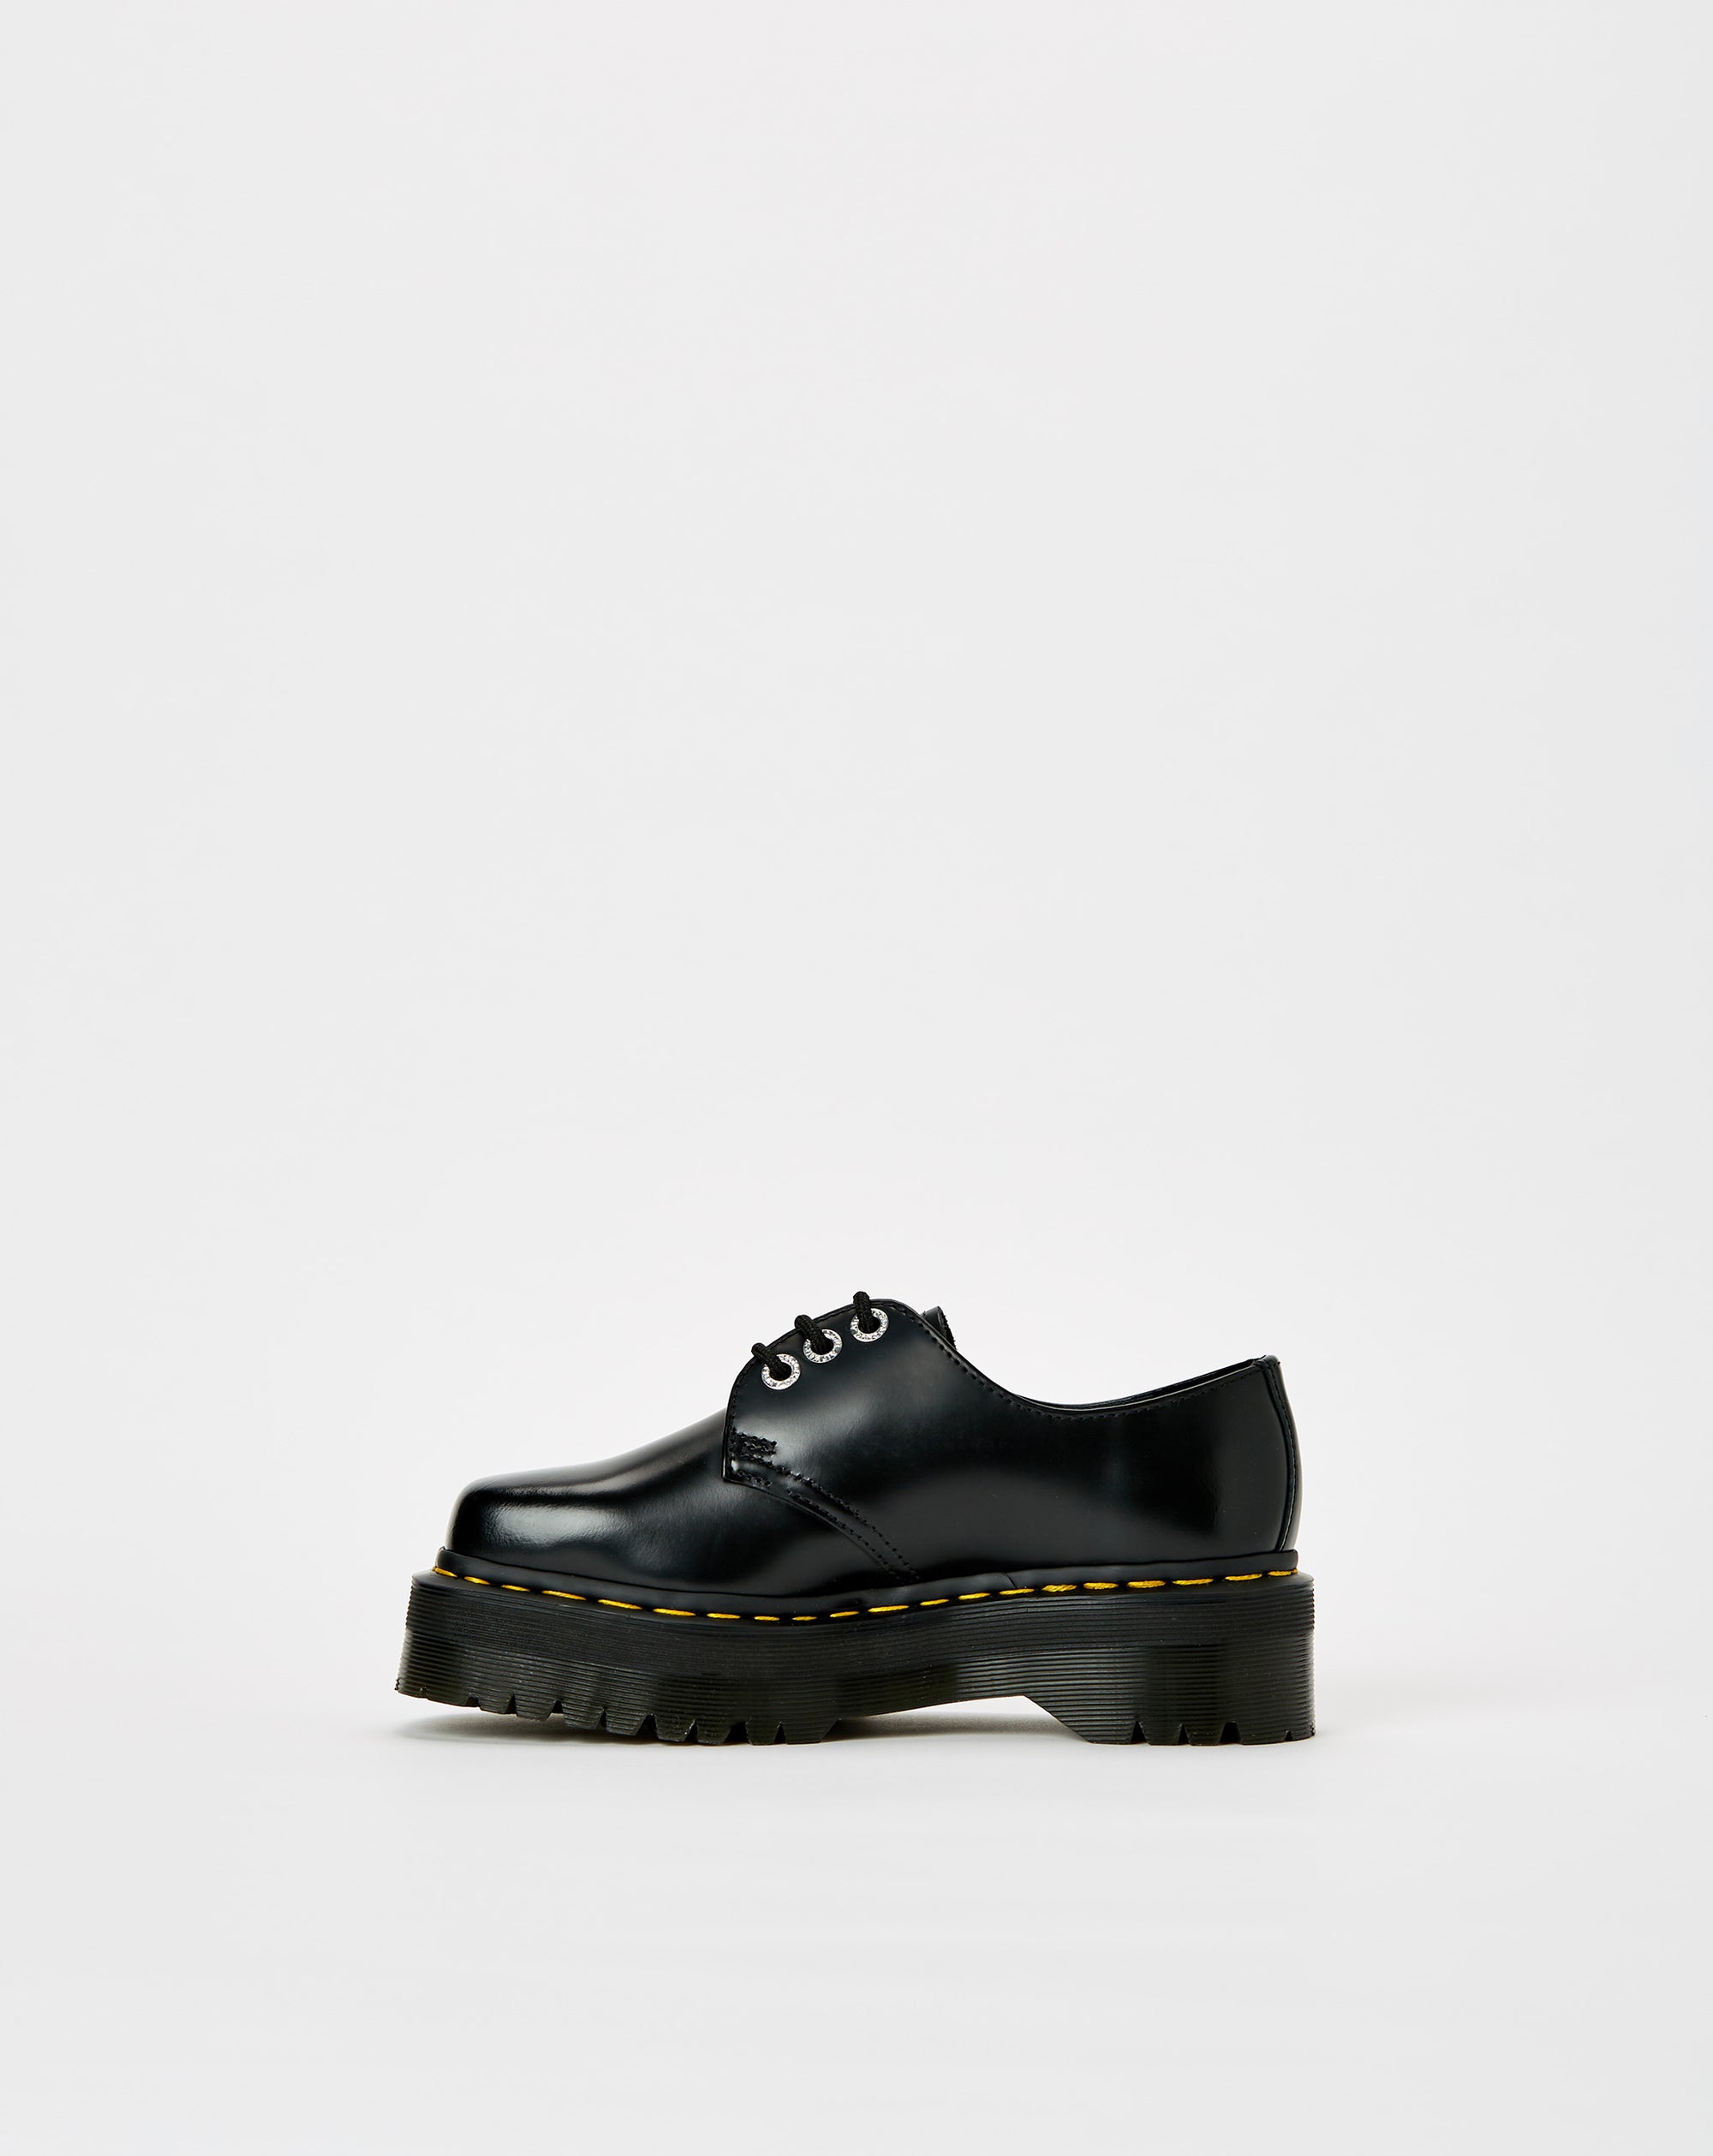 Dr. Martens Women's 1461 Quad Squared - Rule of Next Footwear